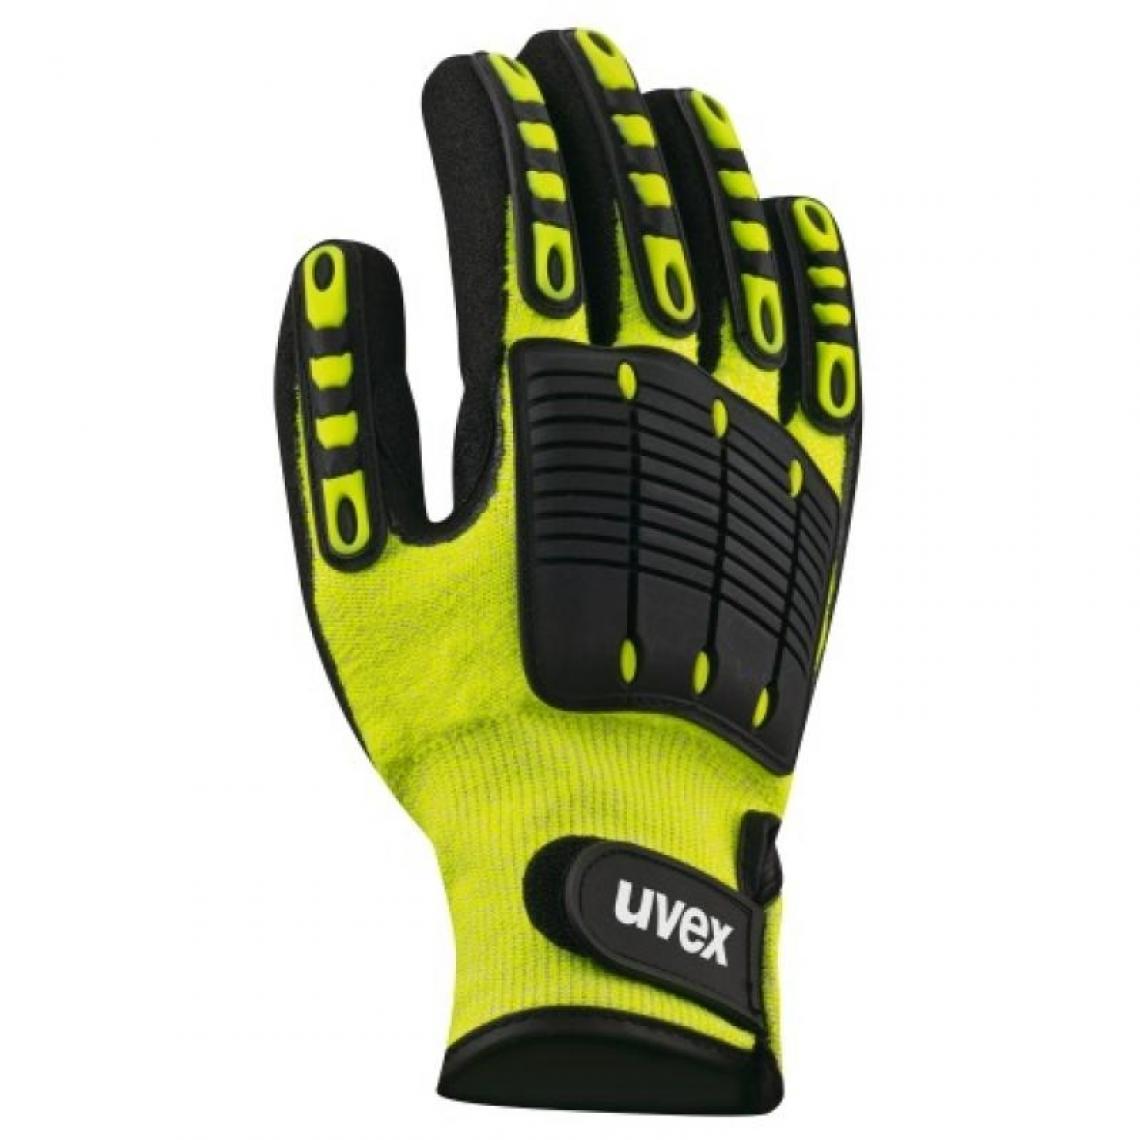 Uvex - Gants synexo impact1 T10(bt10) - Protections pieds et mains